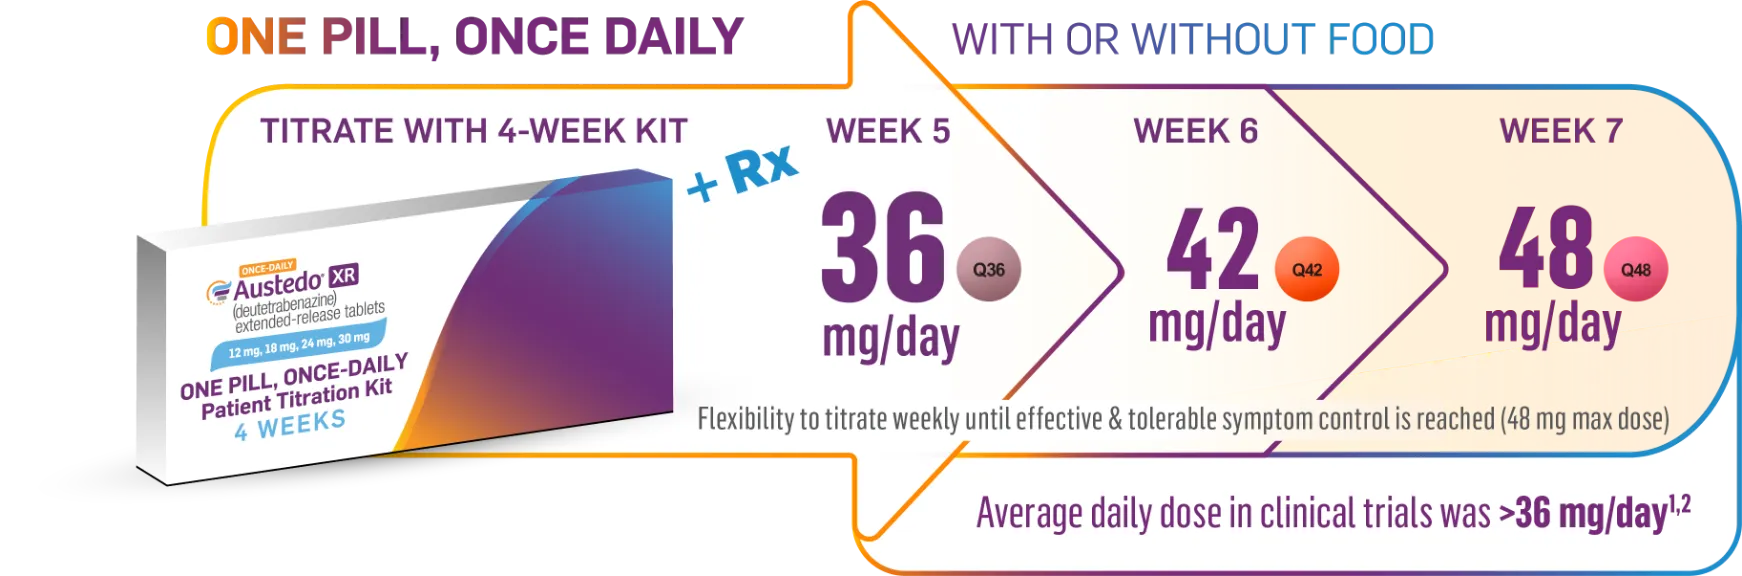 Graphic representing dosing up to 48 mg/day with once pill, once-daily AUSTEDO XR. Can be taken with or without food. Patients reach 30 mg/day with Titration Kit at the end of Week 4. Average dose in clinical trials was >36 mg/day.